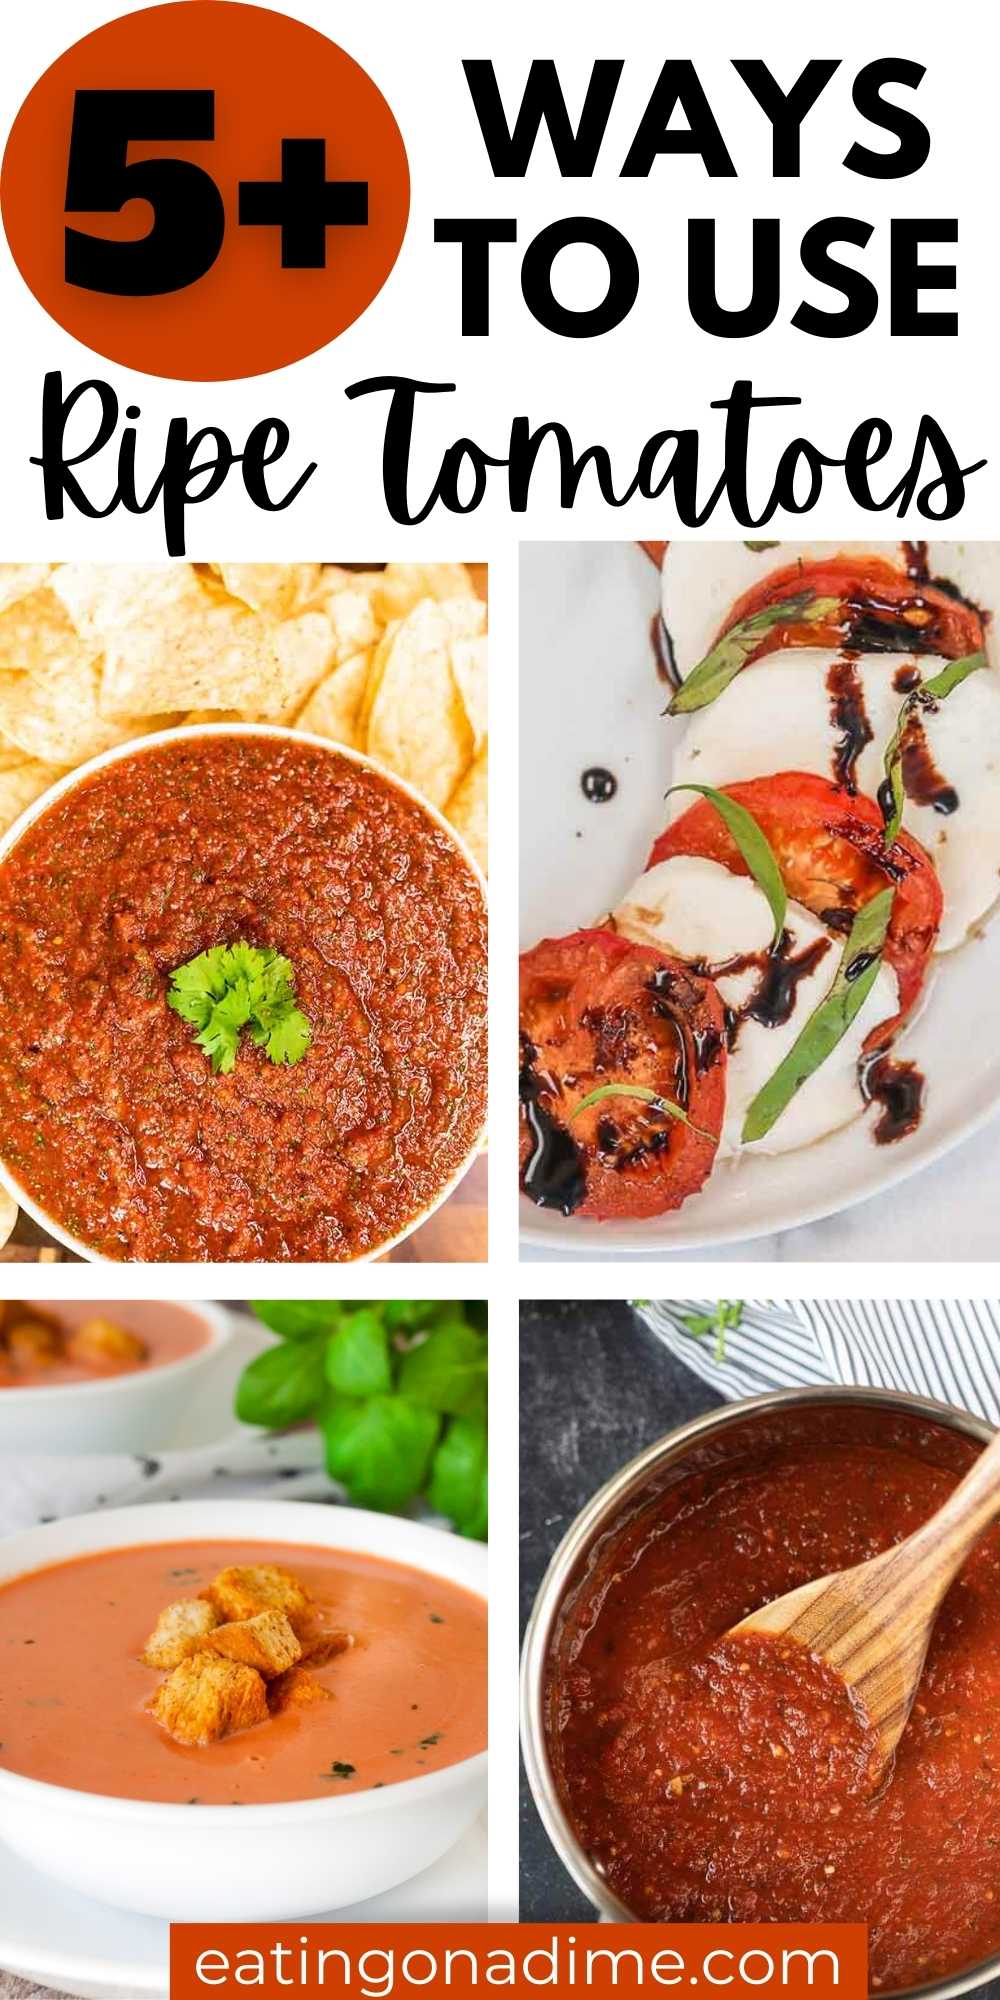 Looking for ways to use ripe tomatoes? You'll love these super easy ways to Use Tomatoes and your family will, too! You are going to love all of these great ways to use over ripe tomatoes and all are easy to make too! #eatingonadime #tomatorecipes #ripetomatoes 
